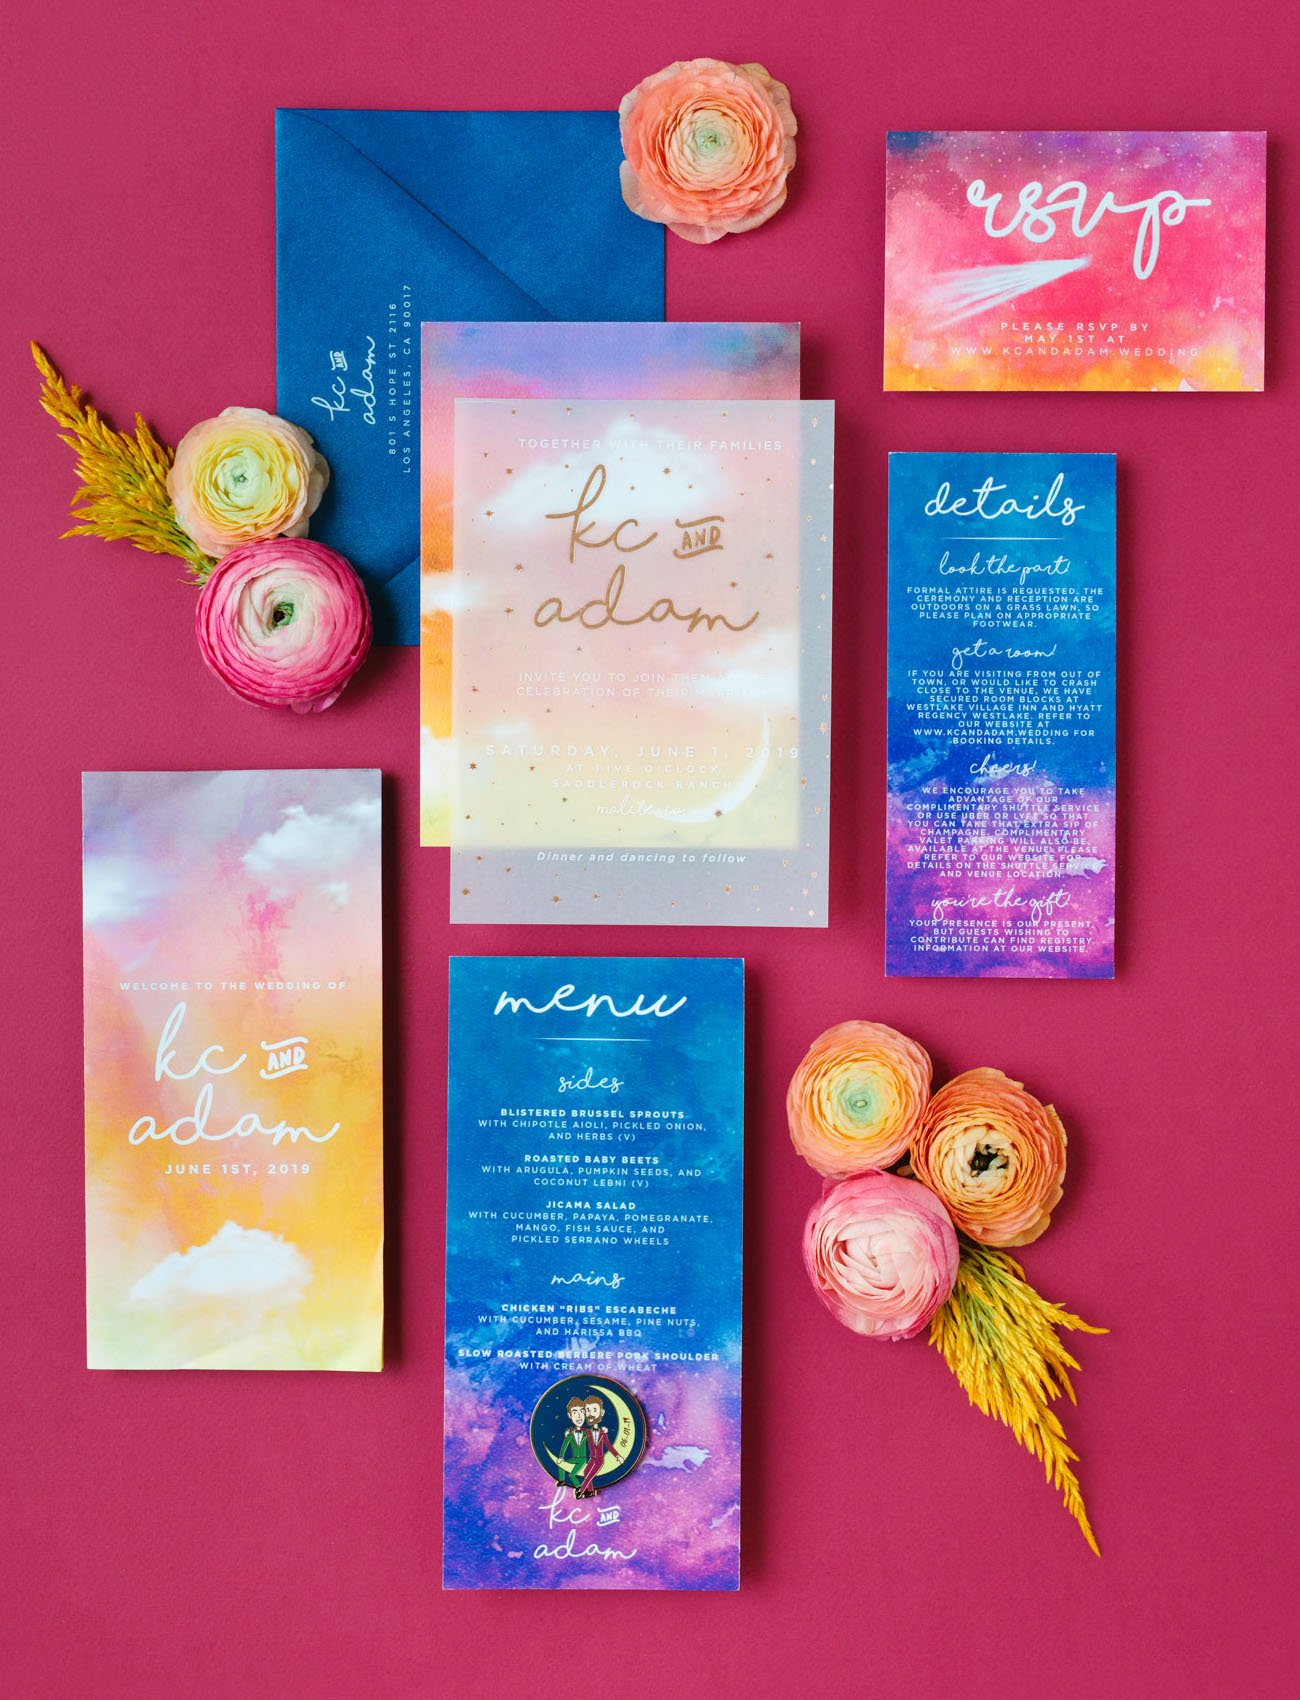 The wedding invitation suite was super bright and colorful, with lot sof watercolors